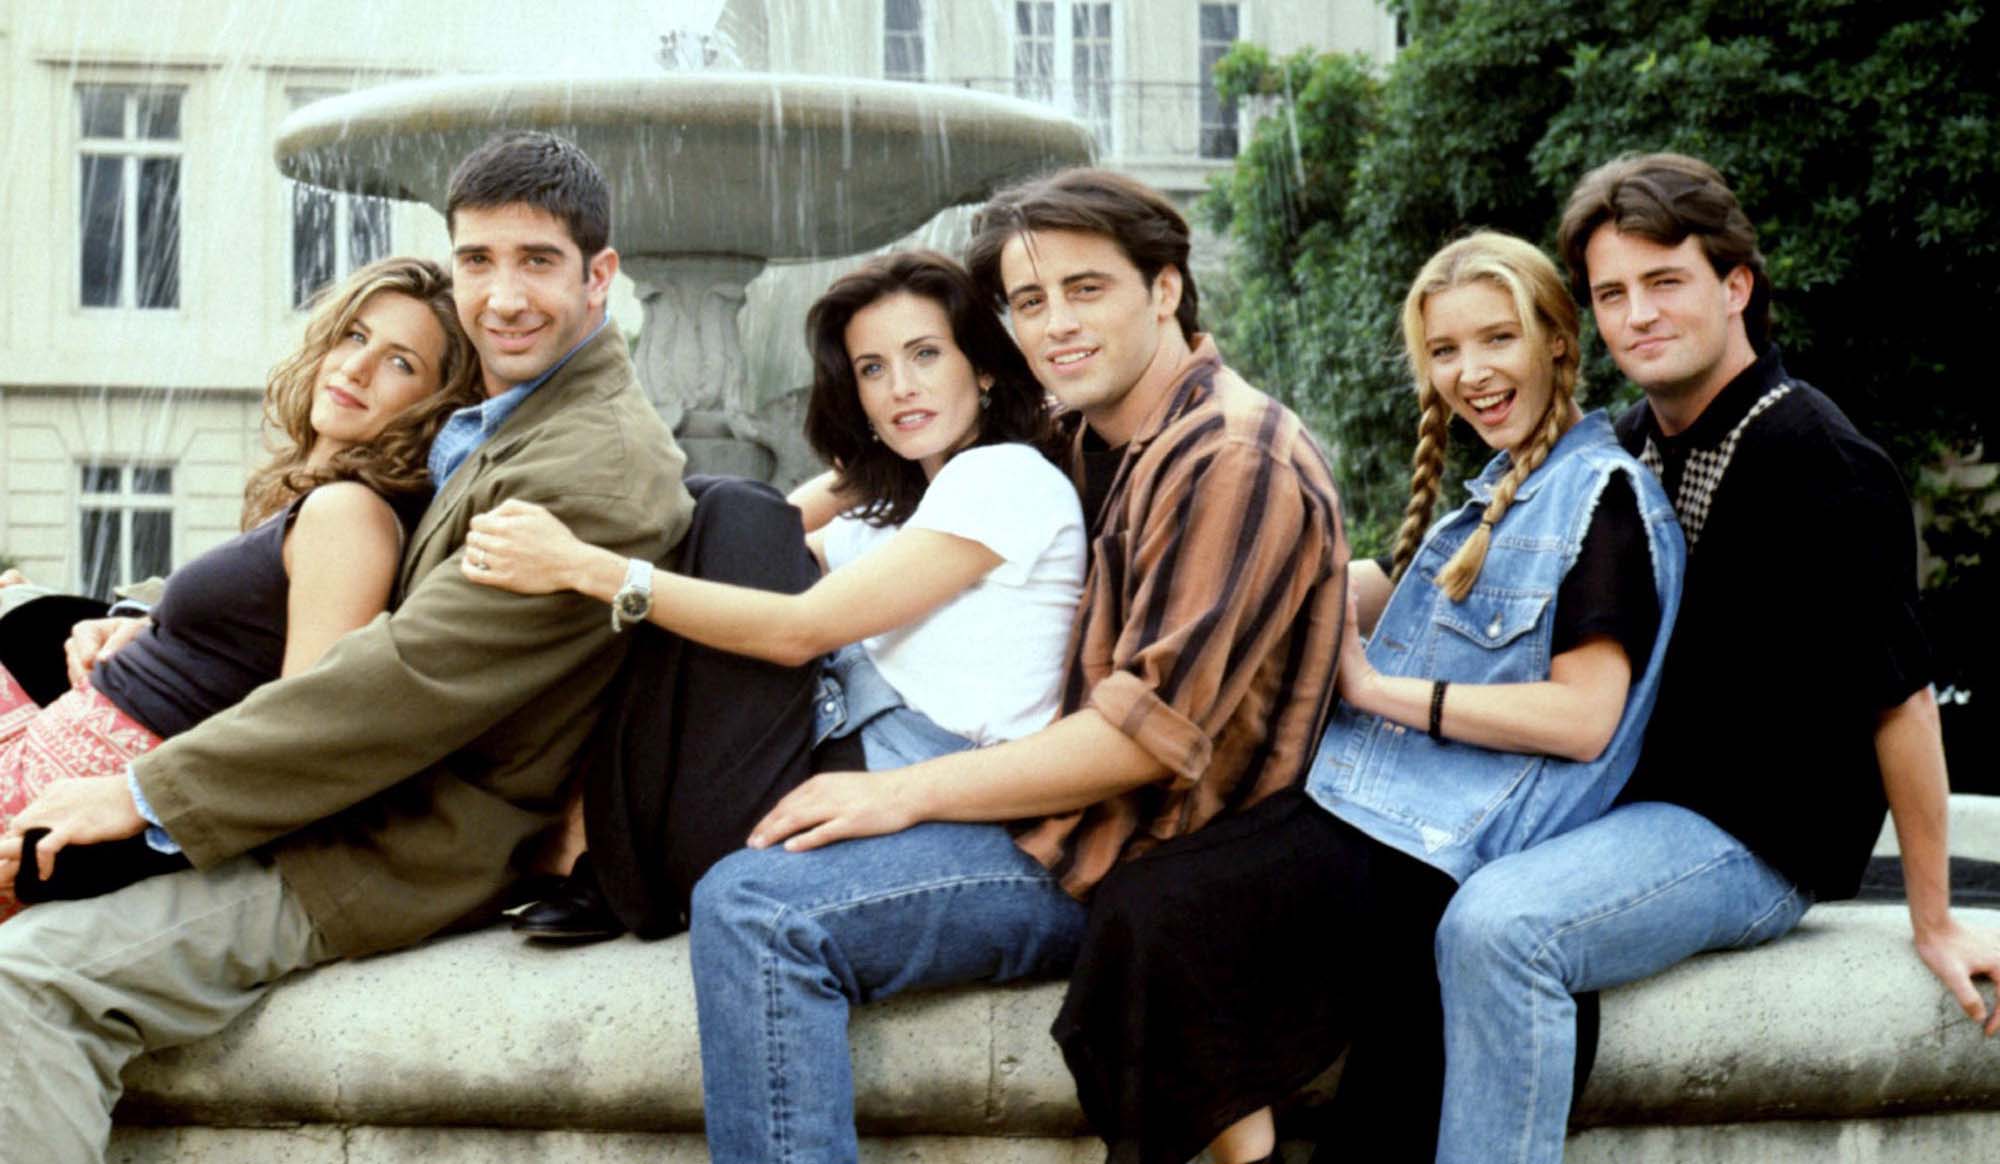 Let’s look at the most offensive moments in ‘Friends’, arguably the most popular sitcom of all time. Fast forward to 2019 with us to examine the cringe.